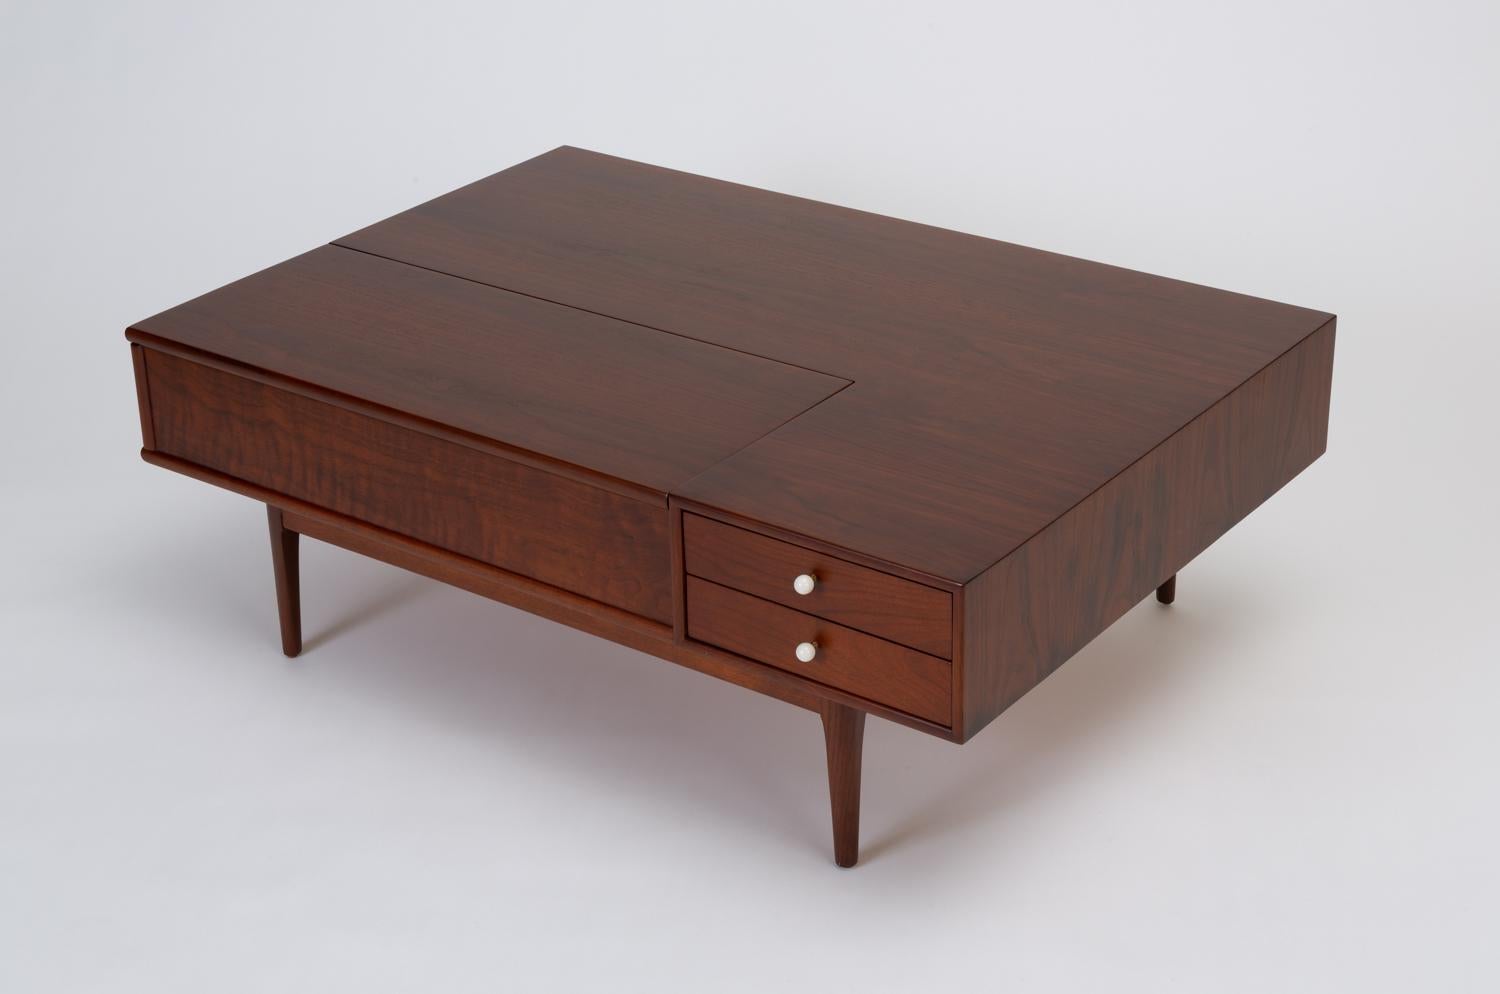 From the iconic Drexel Declaration collection by Kipp Stewart and Stewart MacDougall, this is a deep, rectangular table in walnut wood on recessed legs. Two drawers with signature porcelain drawer pulls sit in the right front corner, and a panel